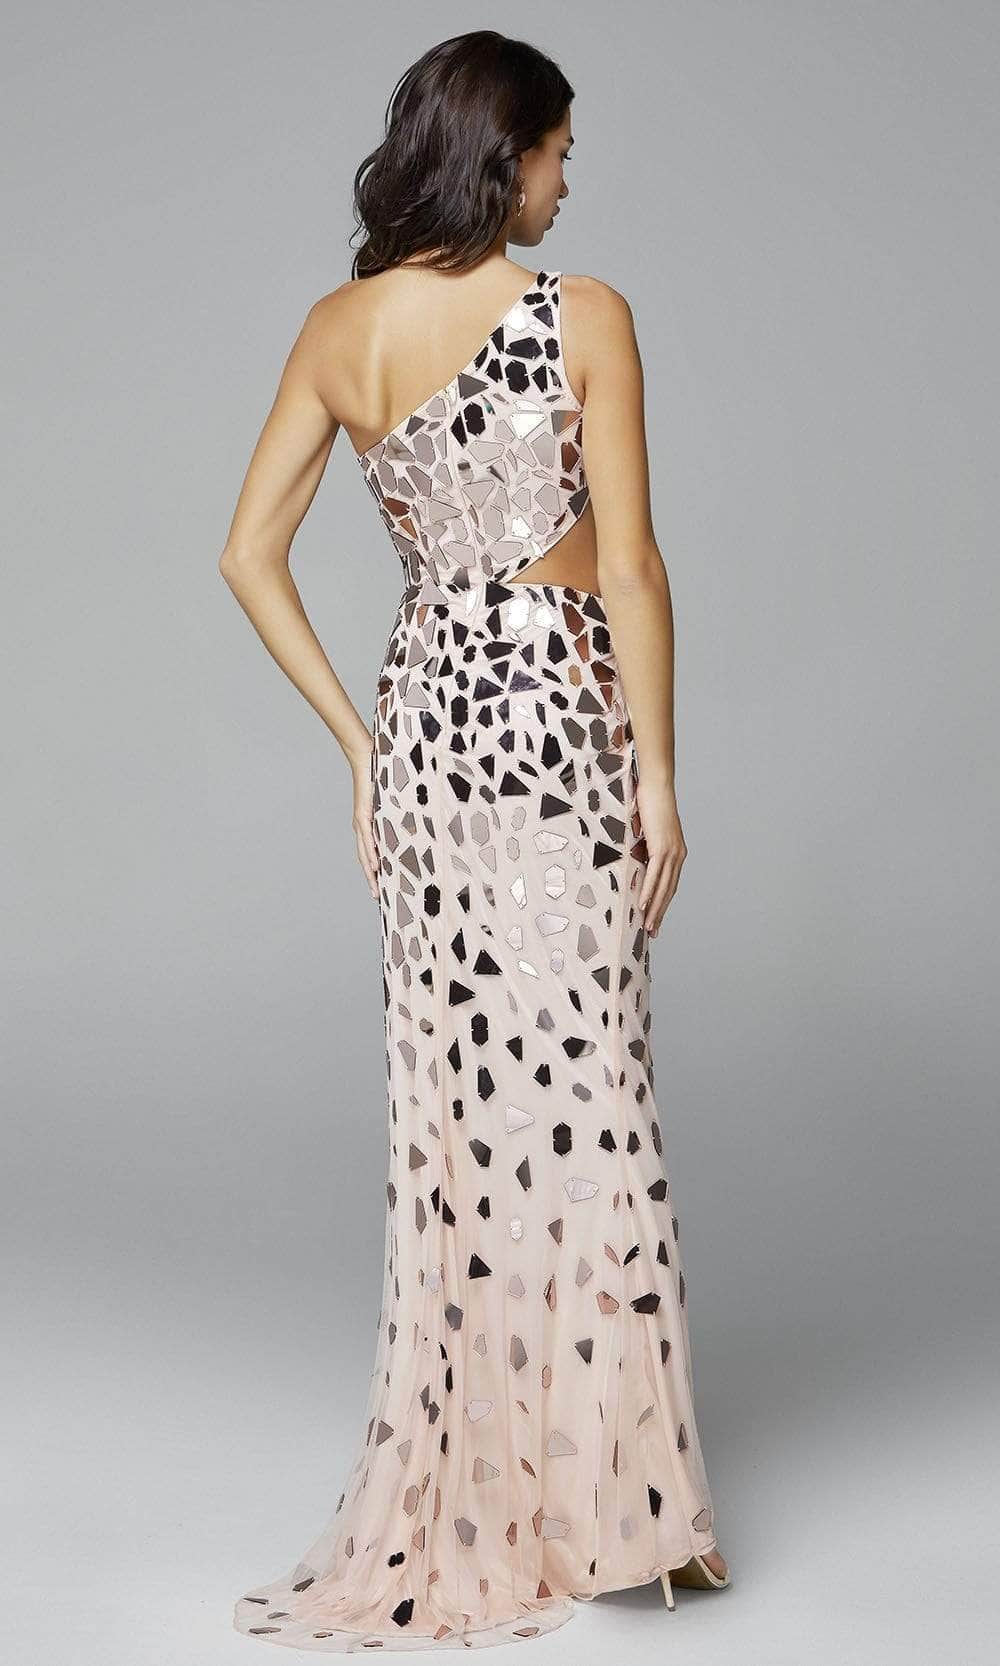 Primavera Couture - Asymmetric Sheath Prom Dress 3623 - 1 pc Rose Gold In Size 4 Available CCSALE 4 / Rose Gold